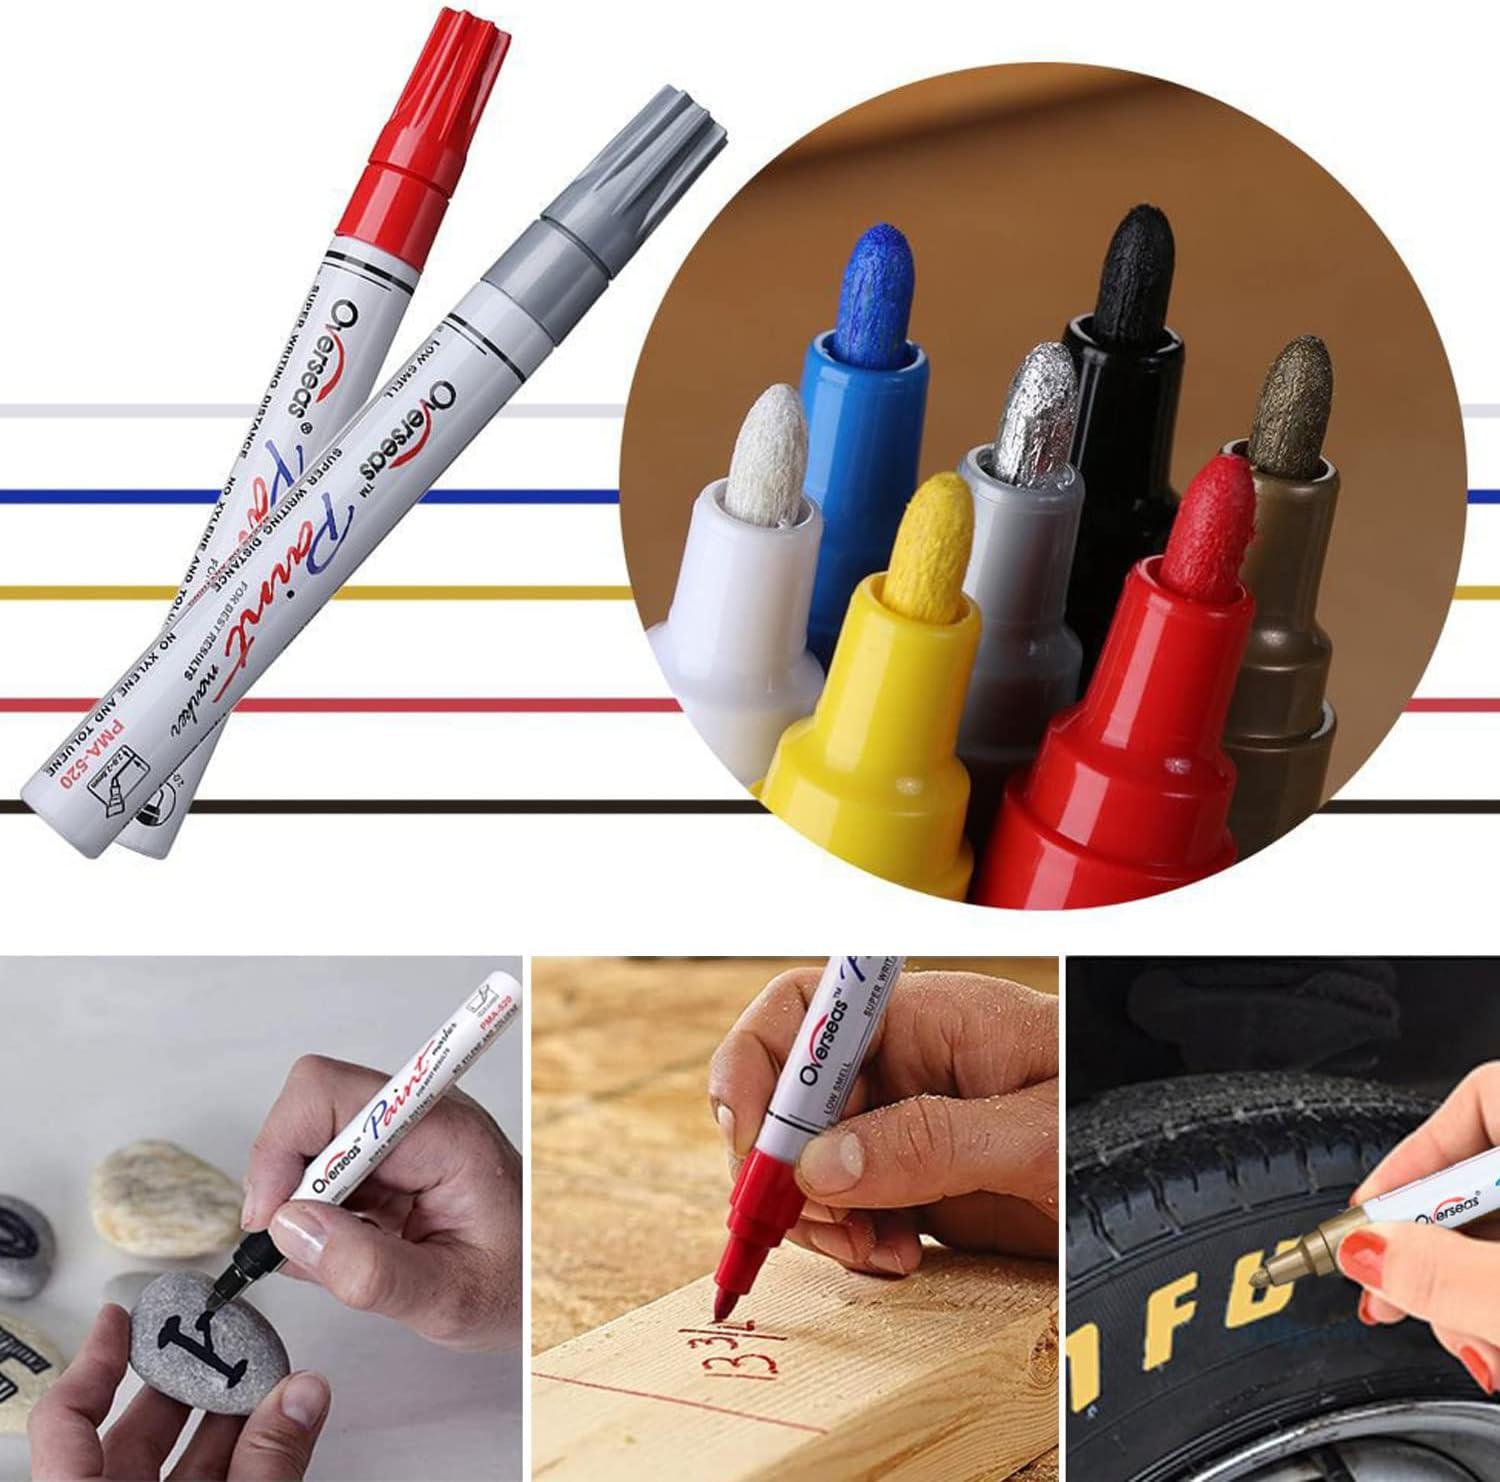 OBOSOE Paint Pens Never Fade Quick Dry Permanent 12 Colors Optional Oil  Based Waterproof Paint Marker Set for Rock Stone Wood Fabric Plastic Canvas  Ceramic Glass Crafts,Tire Metal Markers 